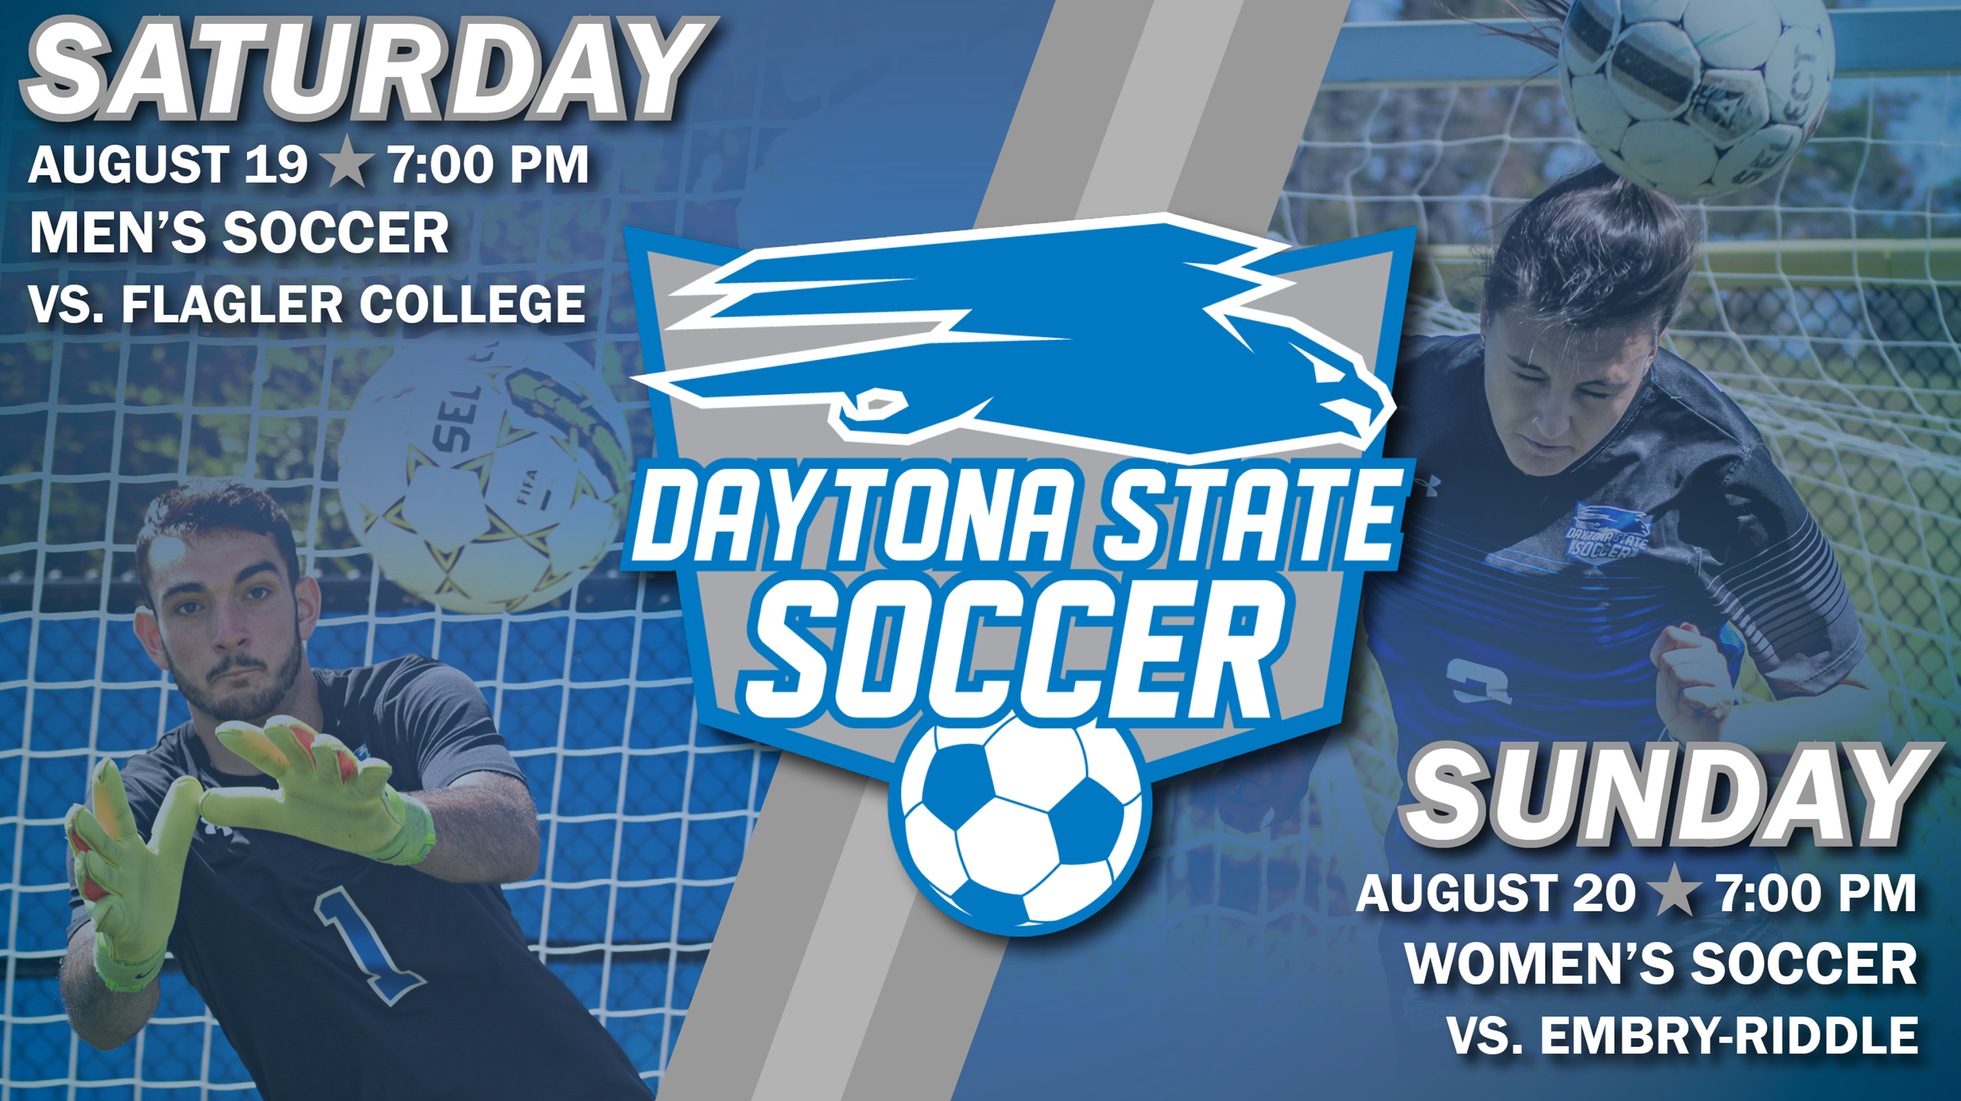 See both Falcon soccer teams in action this weekend